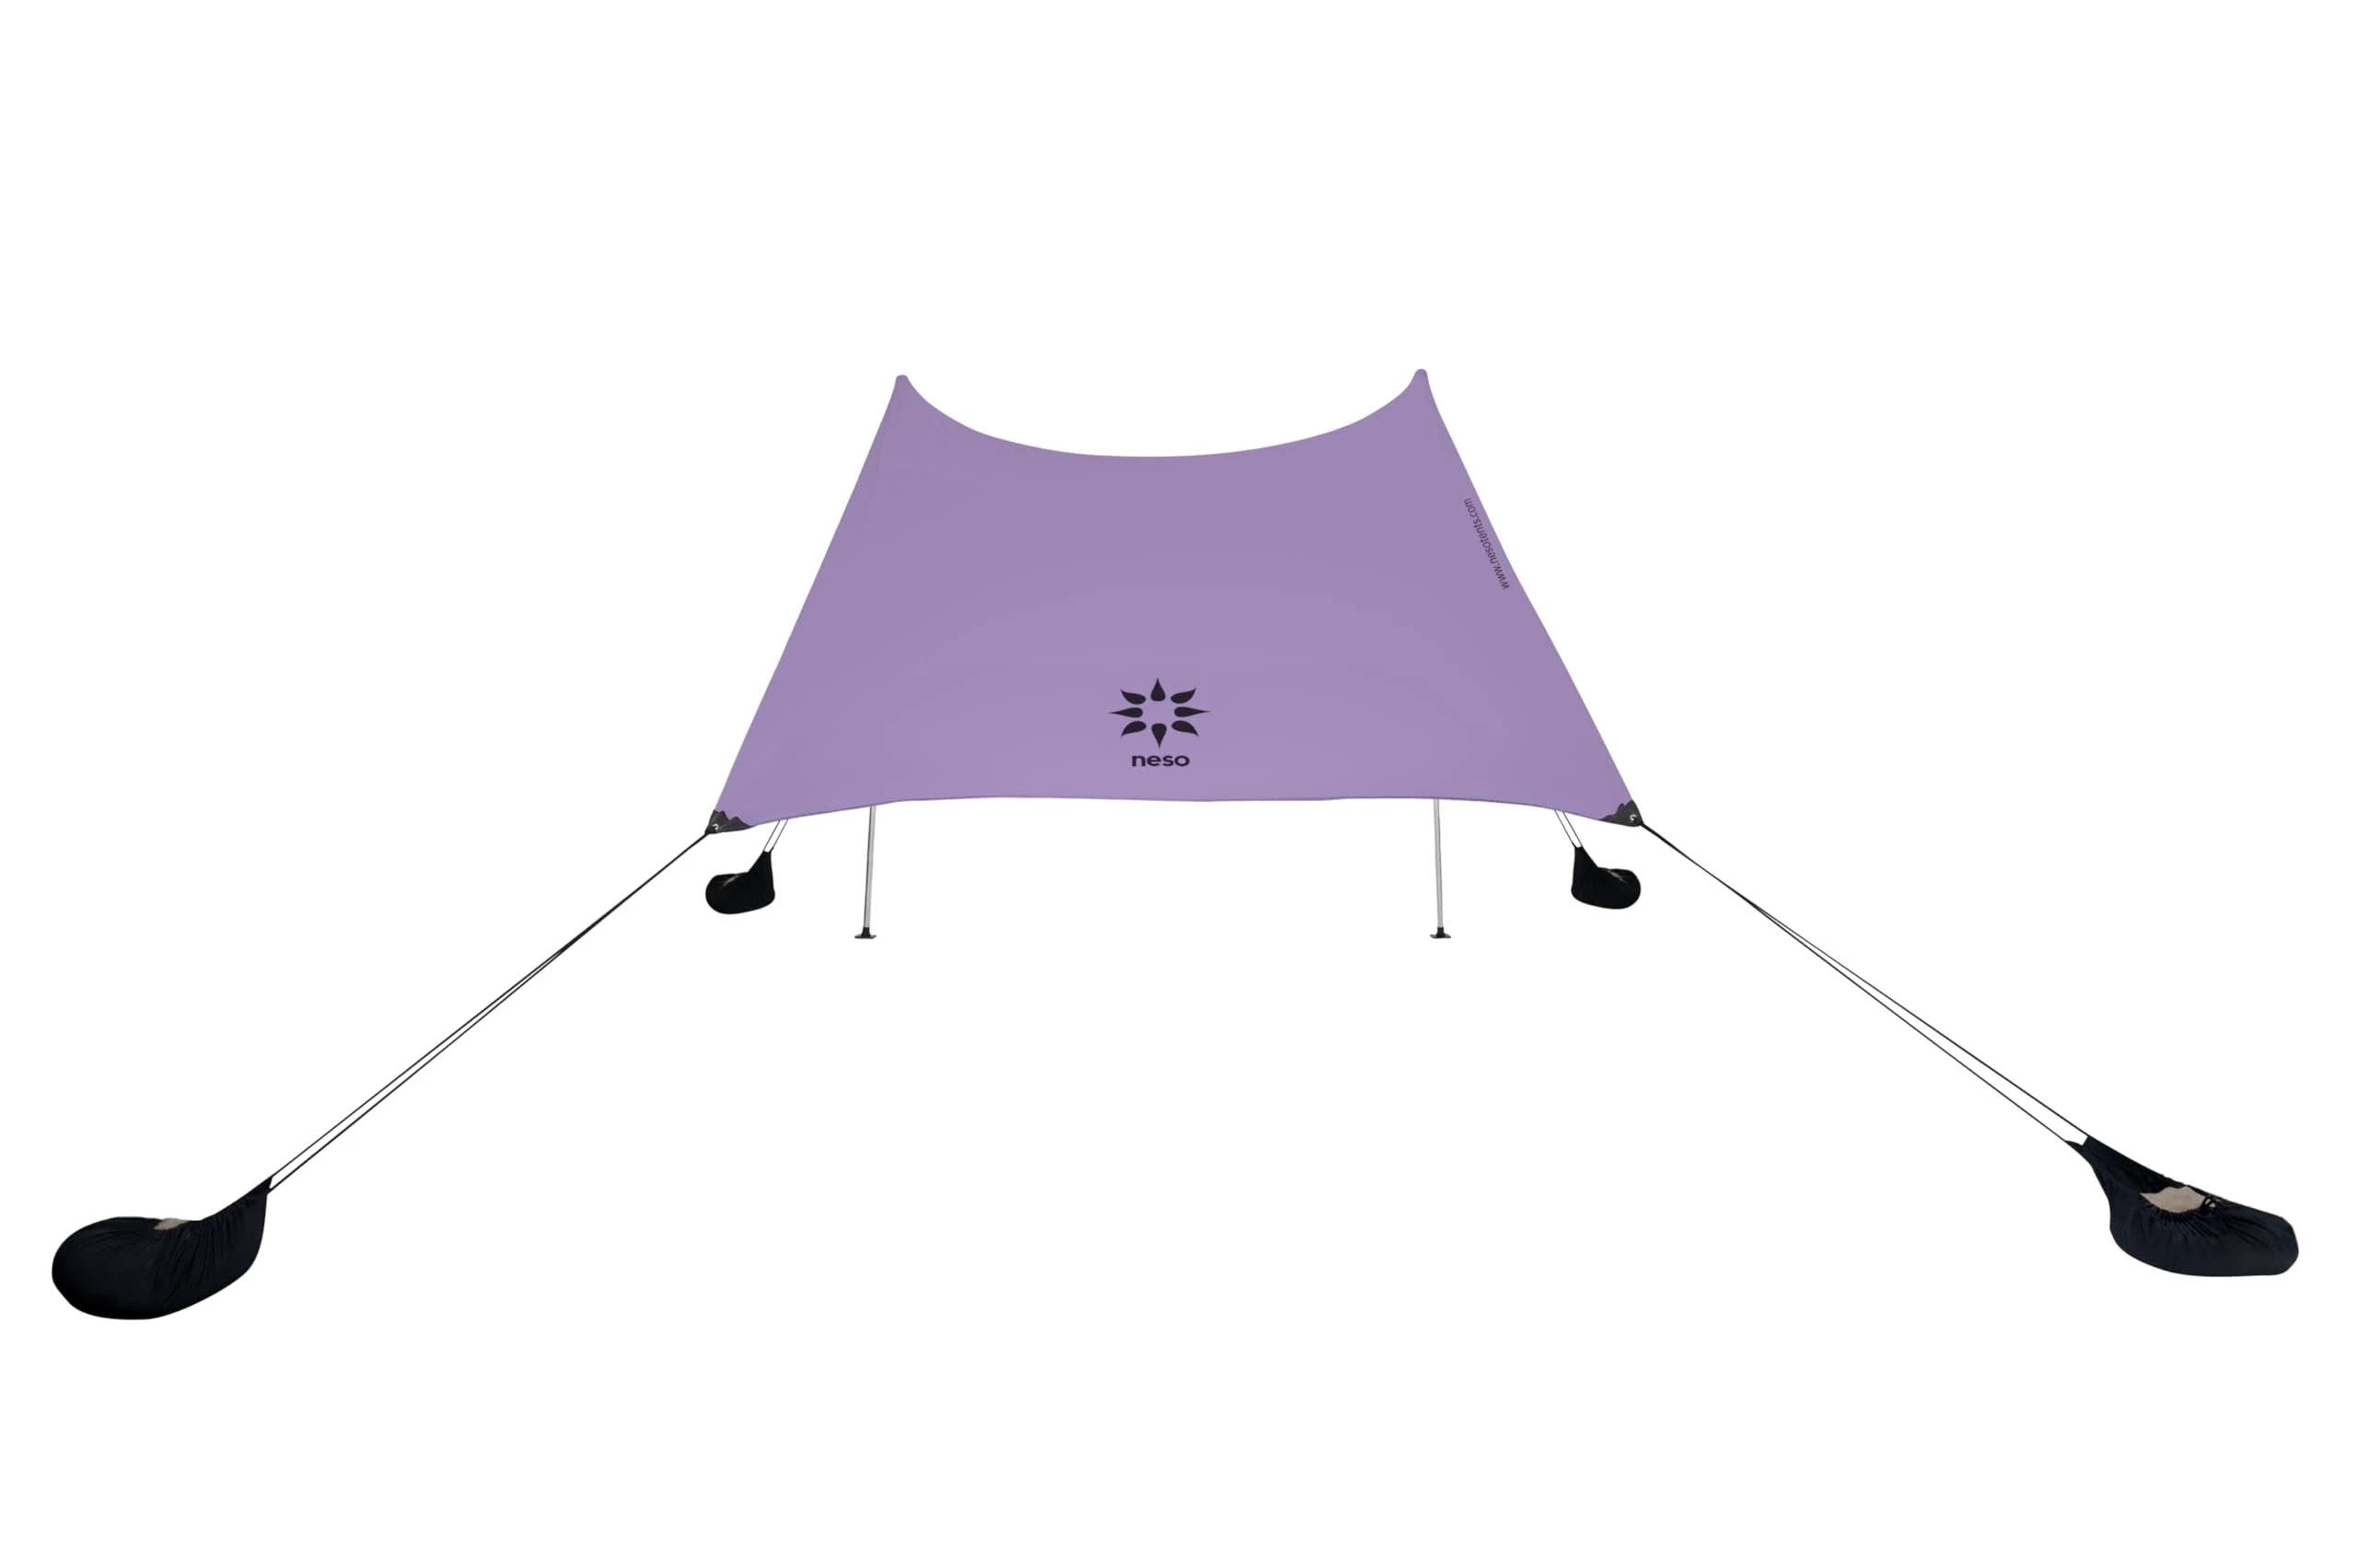 Neso 1 Beach Tent: Lightweight, Portable, and UV Protective | Image